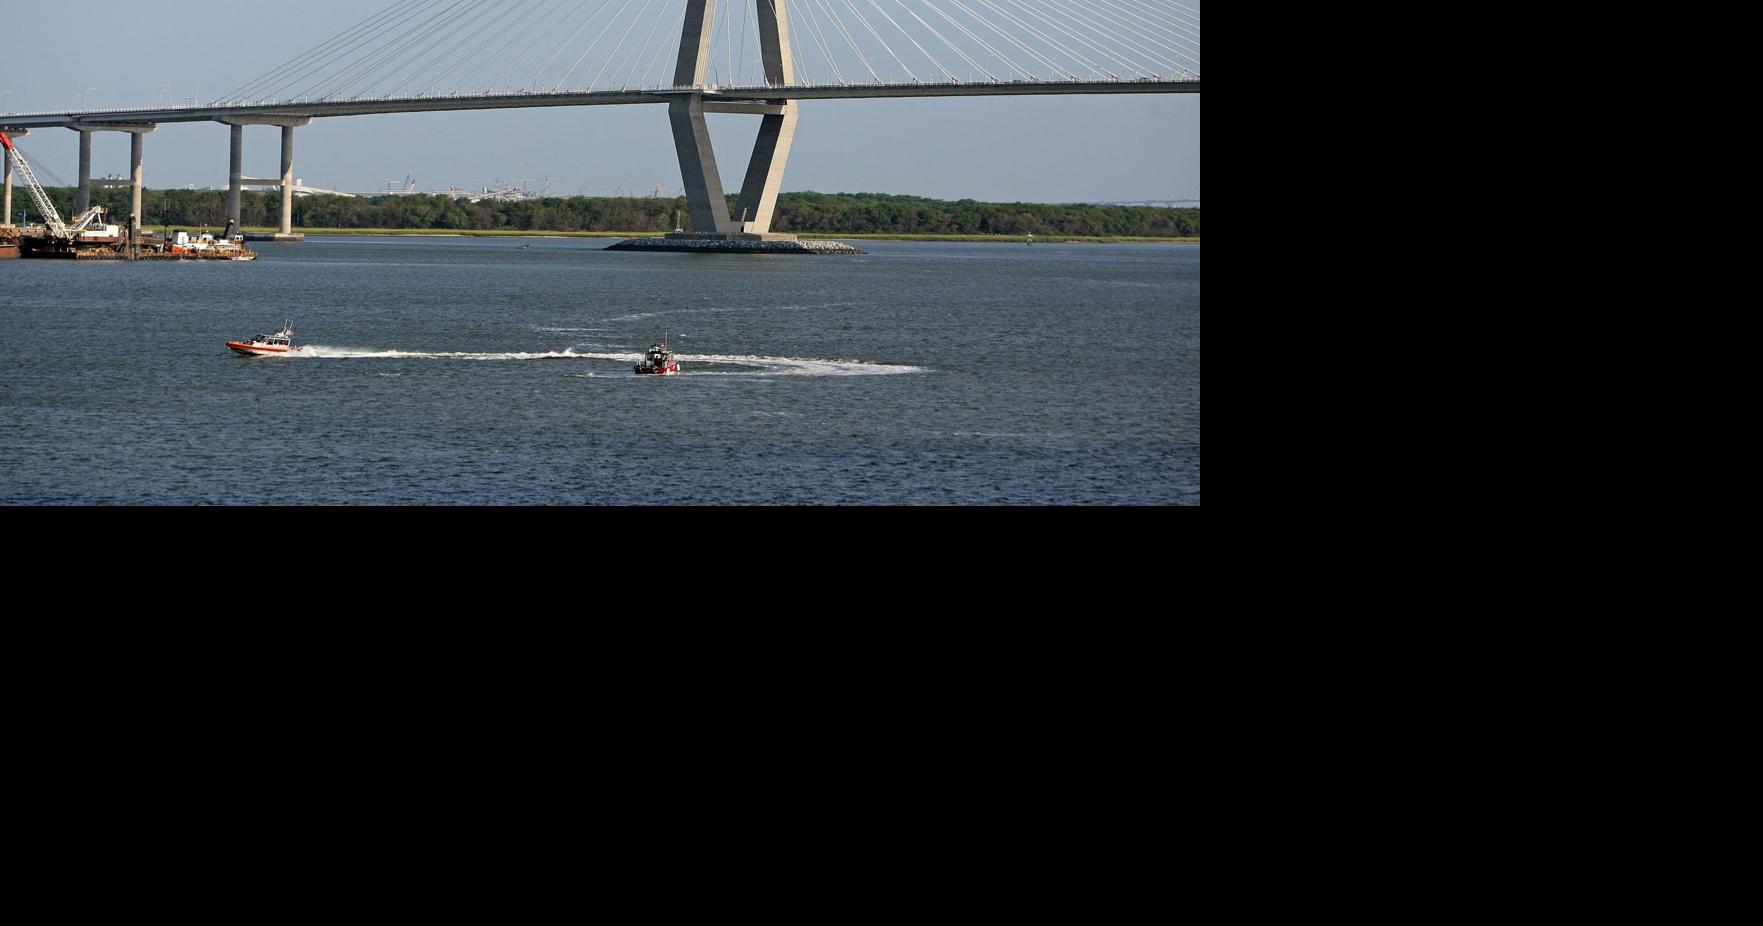 Three rescued after boat crashes into dredge pipe near Ravenel Bridge |  News 